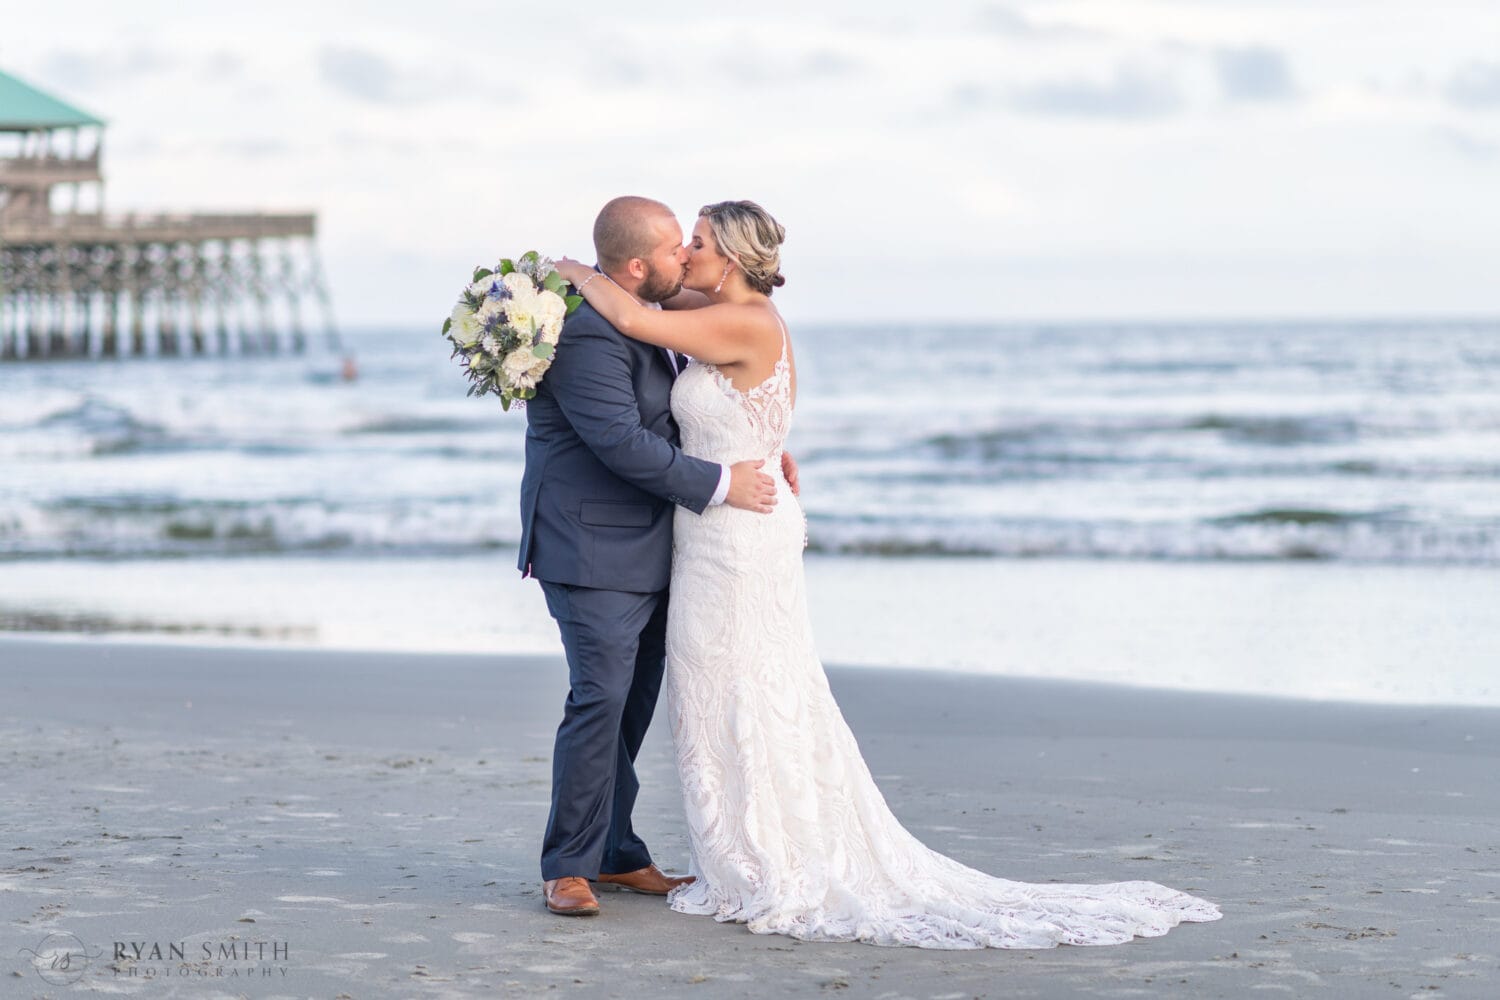 Kiss in front of the ocean - Folly Beach - Charleston